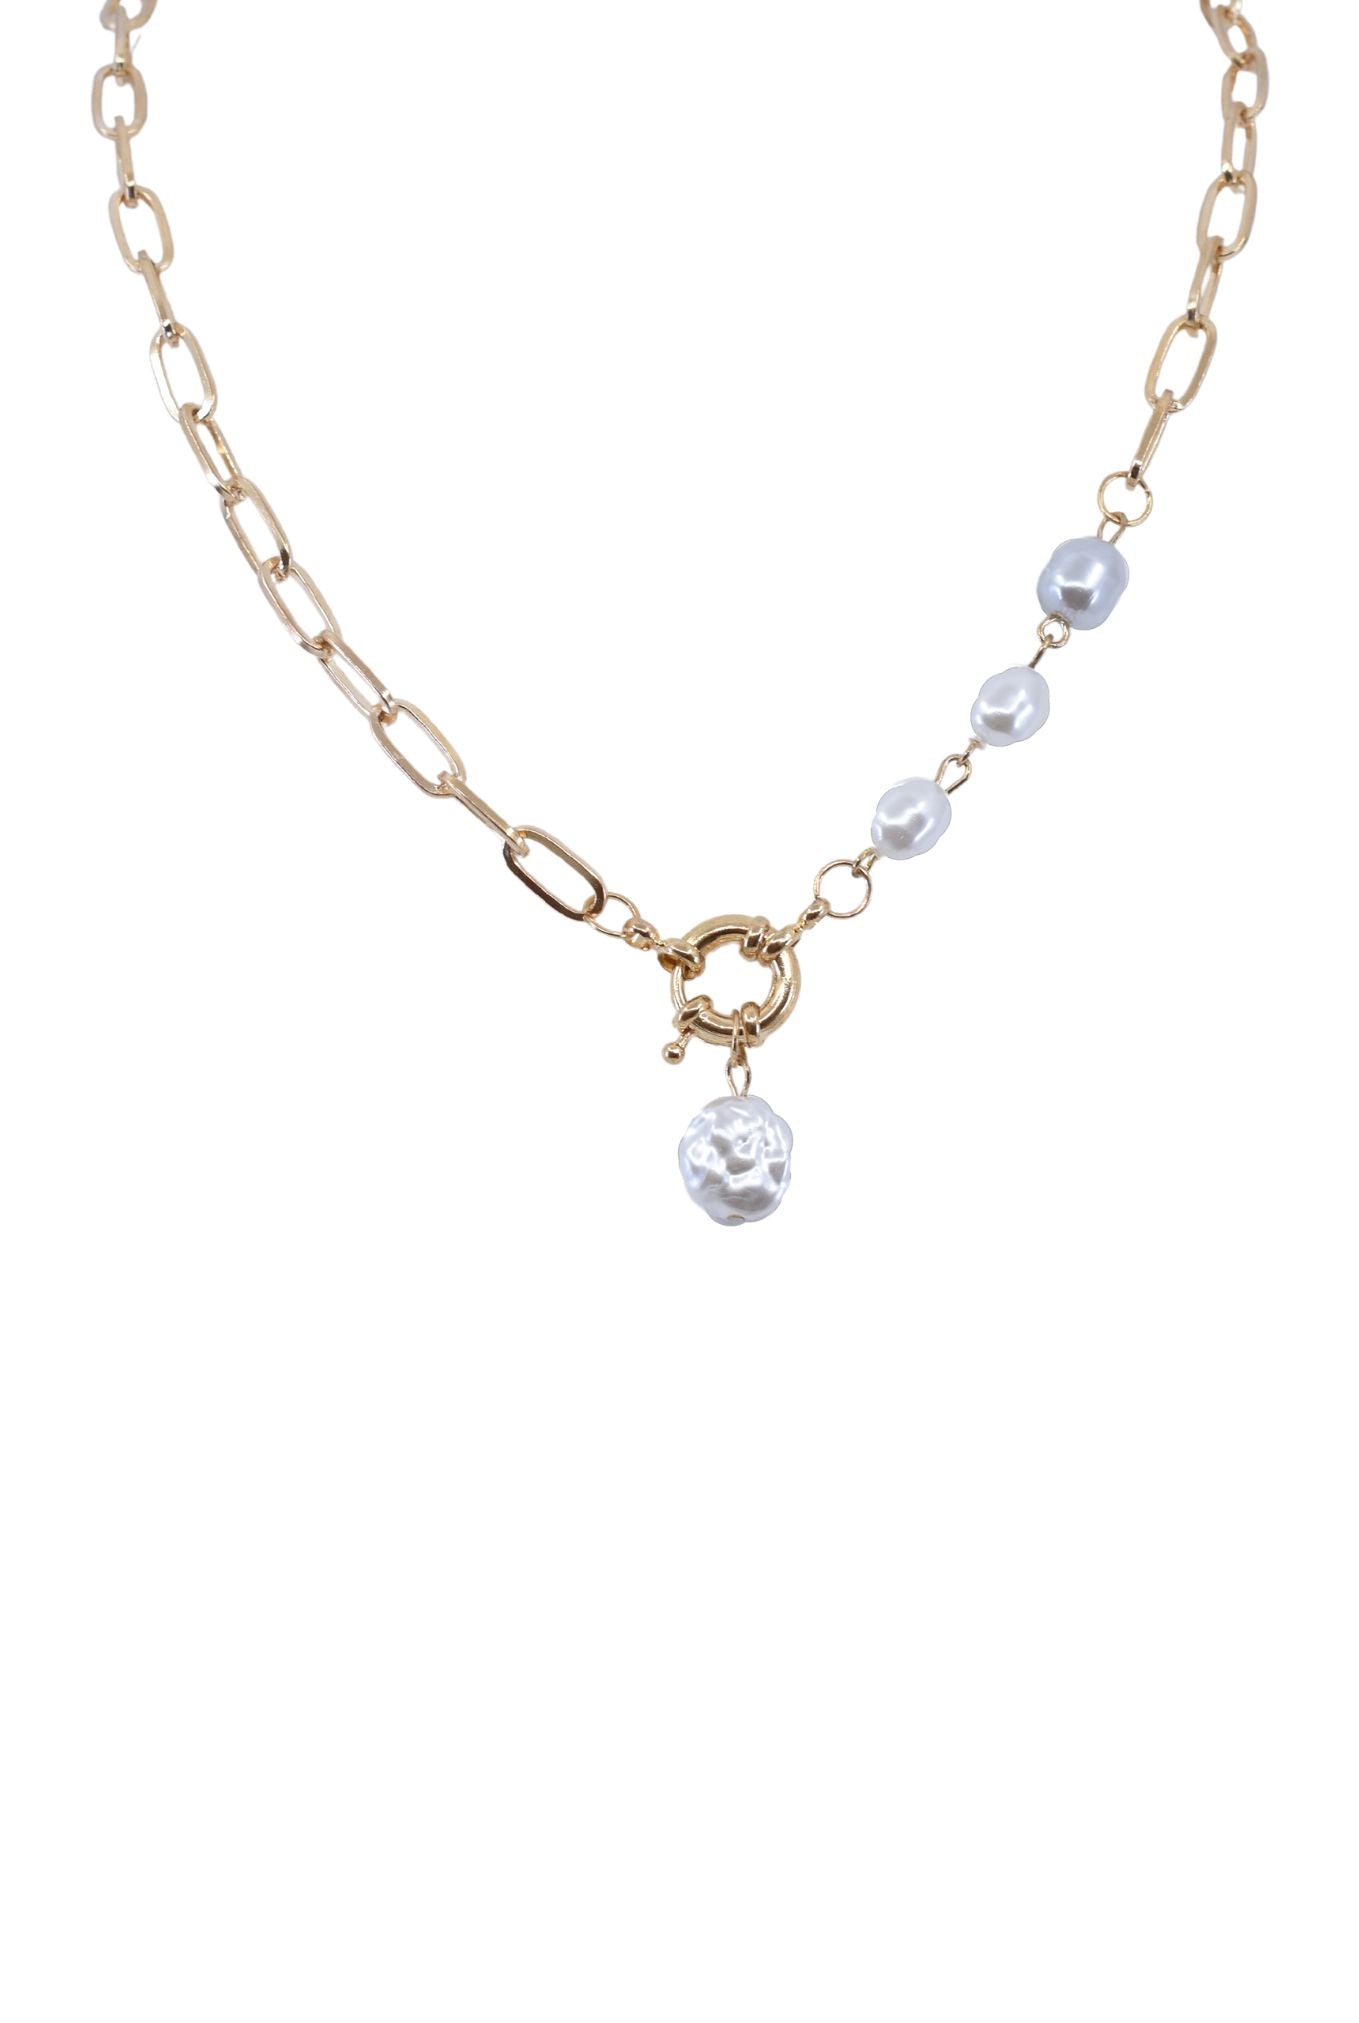 Gold Chain Necklace with 3 Pearl Accent Beads and Pendant